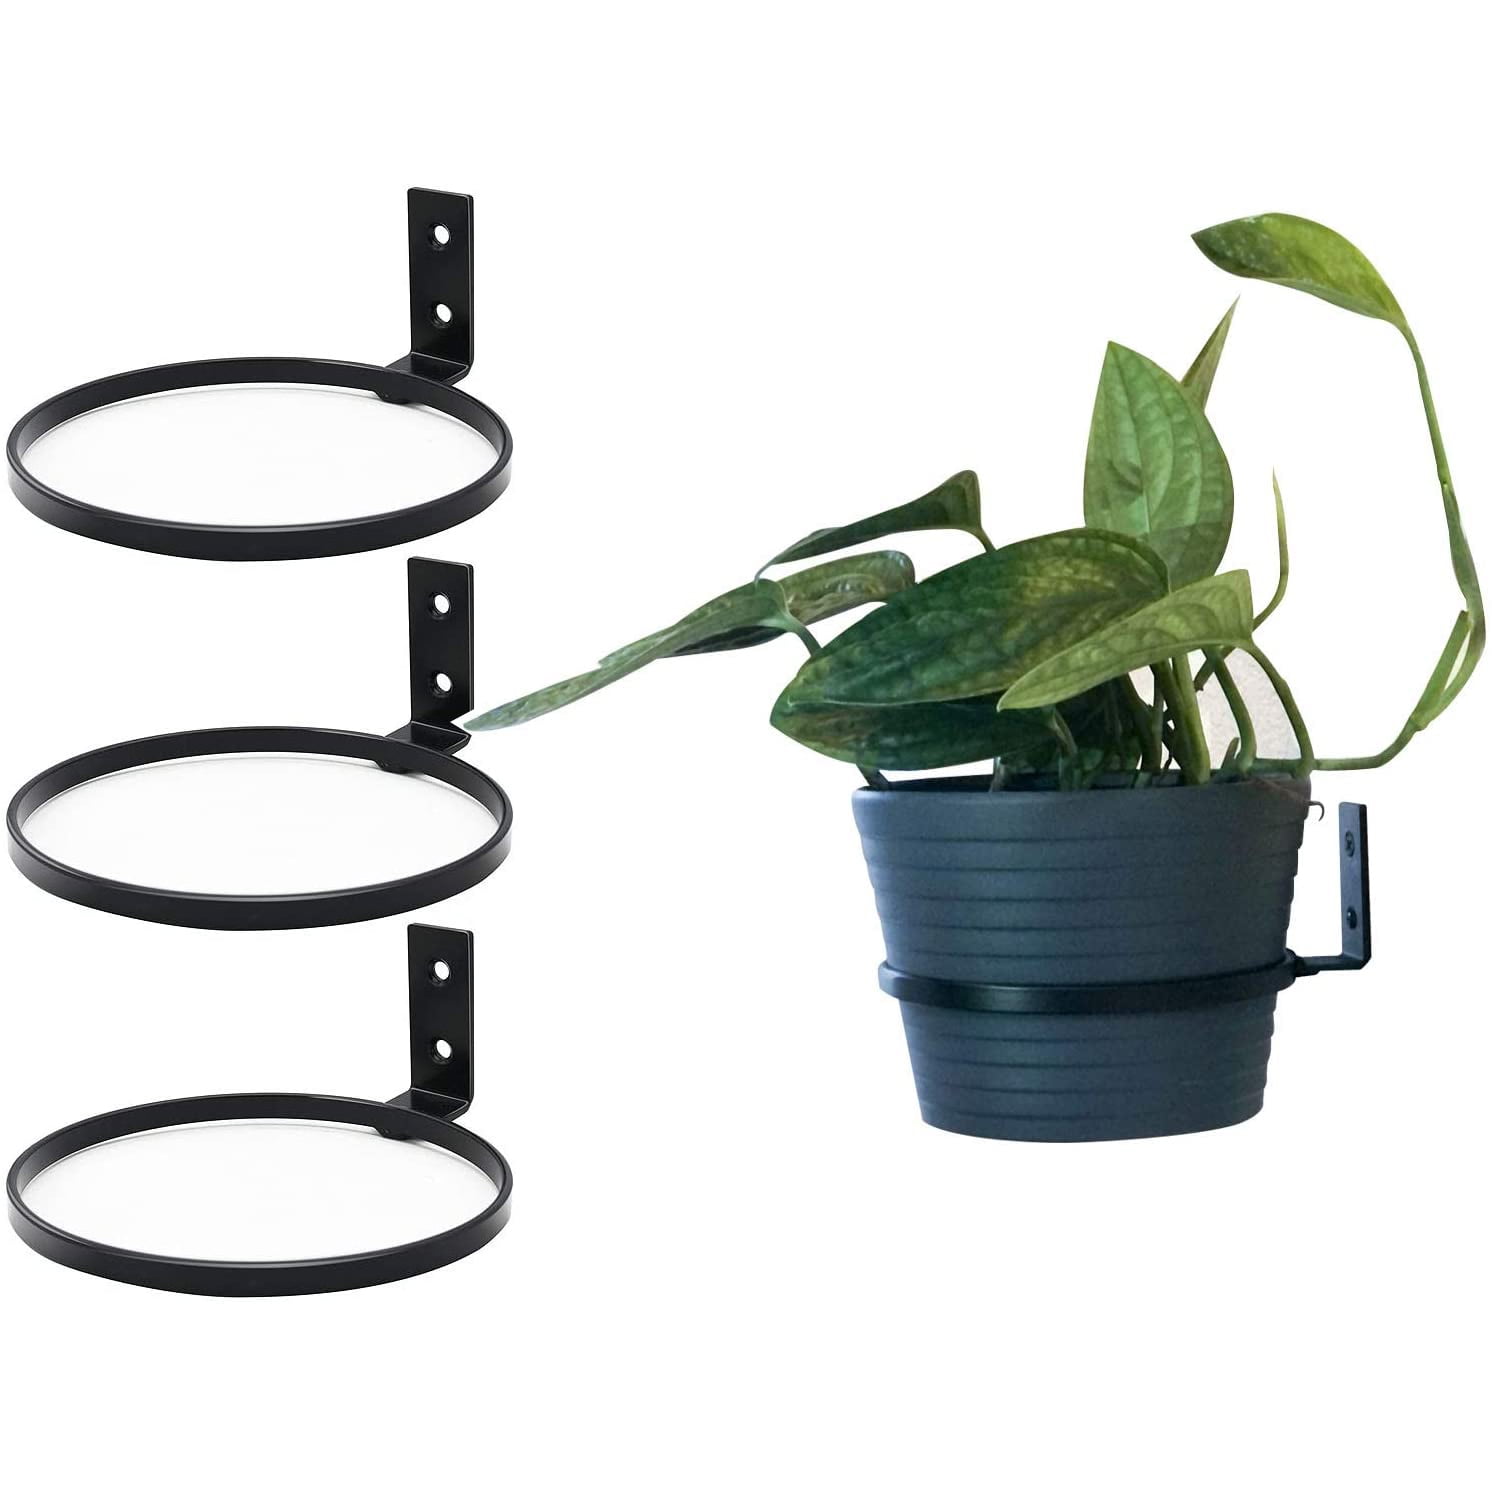 Casewin 8 inch Flower Pot Holder Ring Wall Mounted Set of 3 Heavy Duty Metal Wall Plant Holder Plant Hanging Bracket Hanger for Outdoor Indoor b1202b43 ba5f 46c3 950f b38ecf120366.dd6c8df91b91ff09e76adf097e573cf2